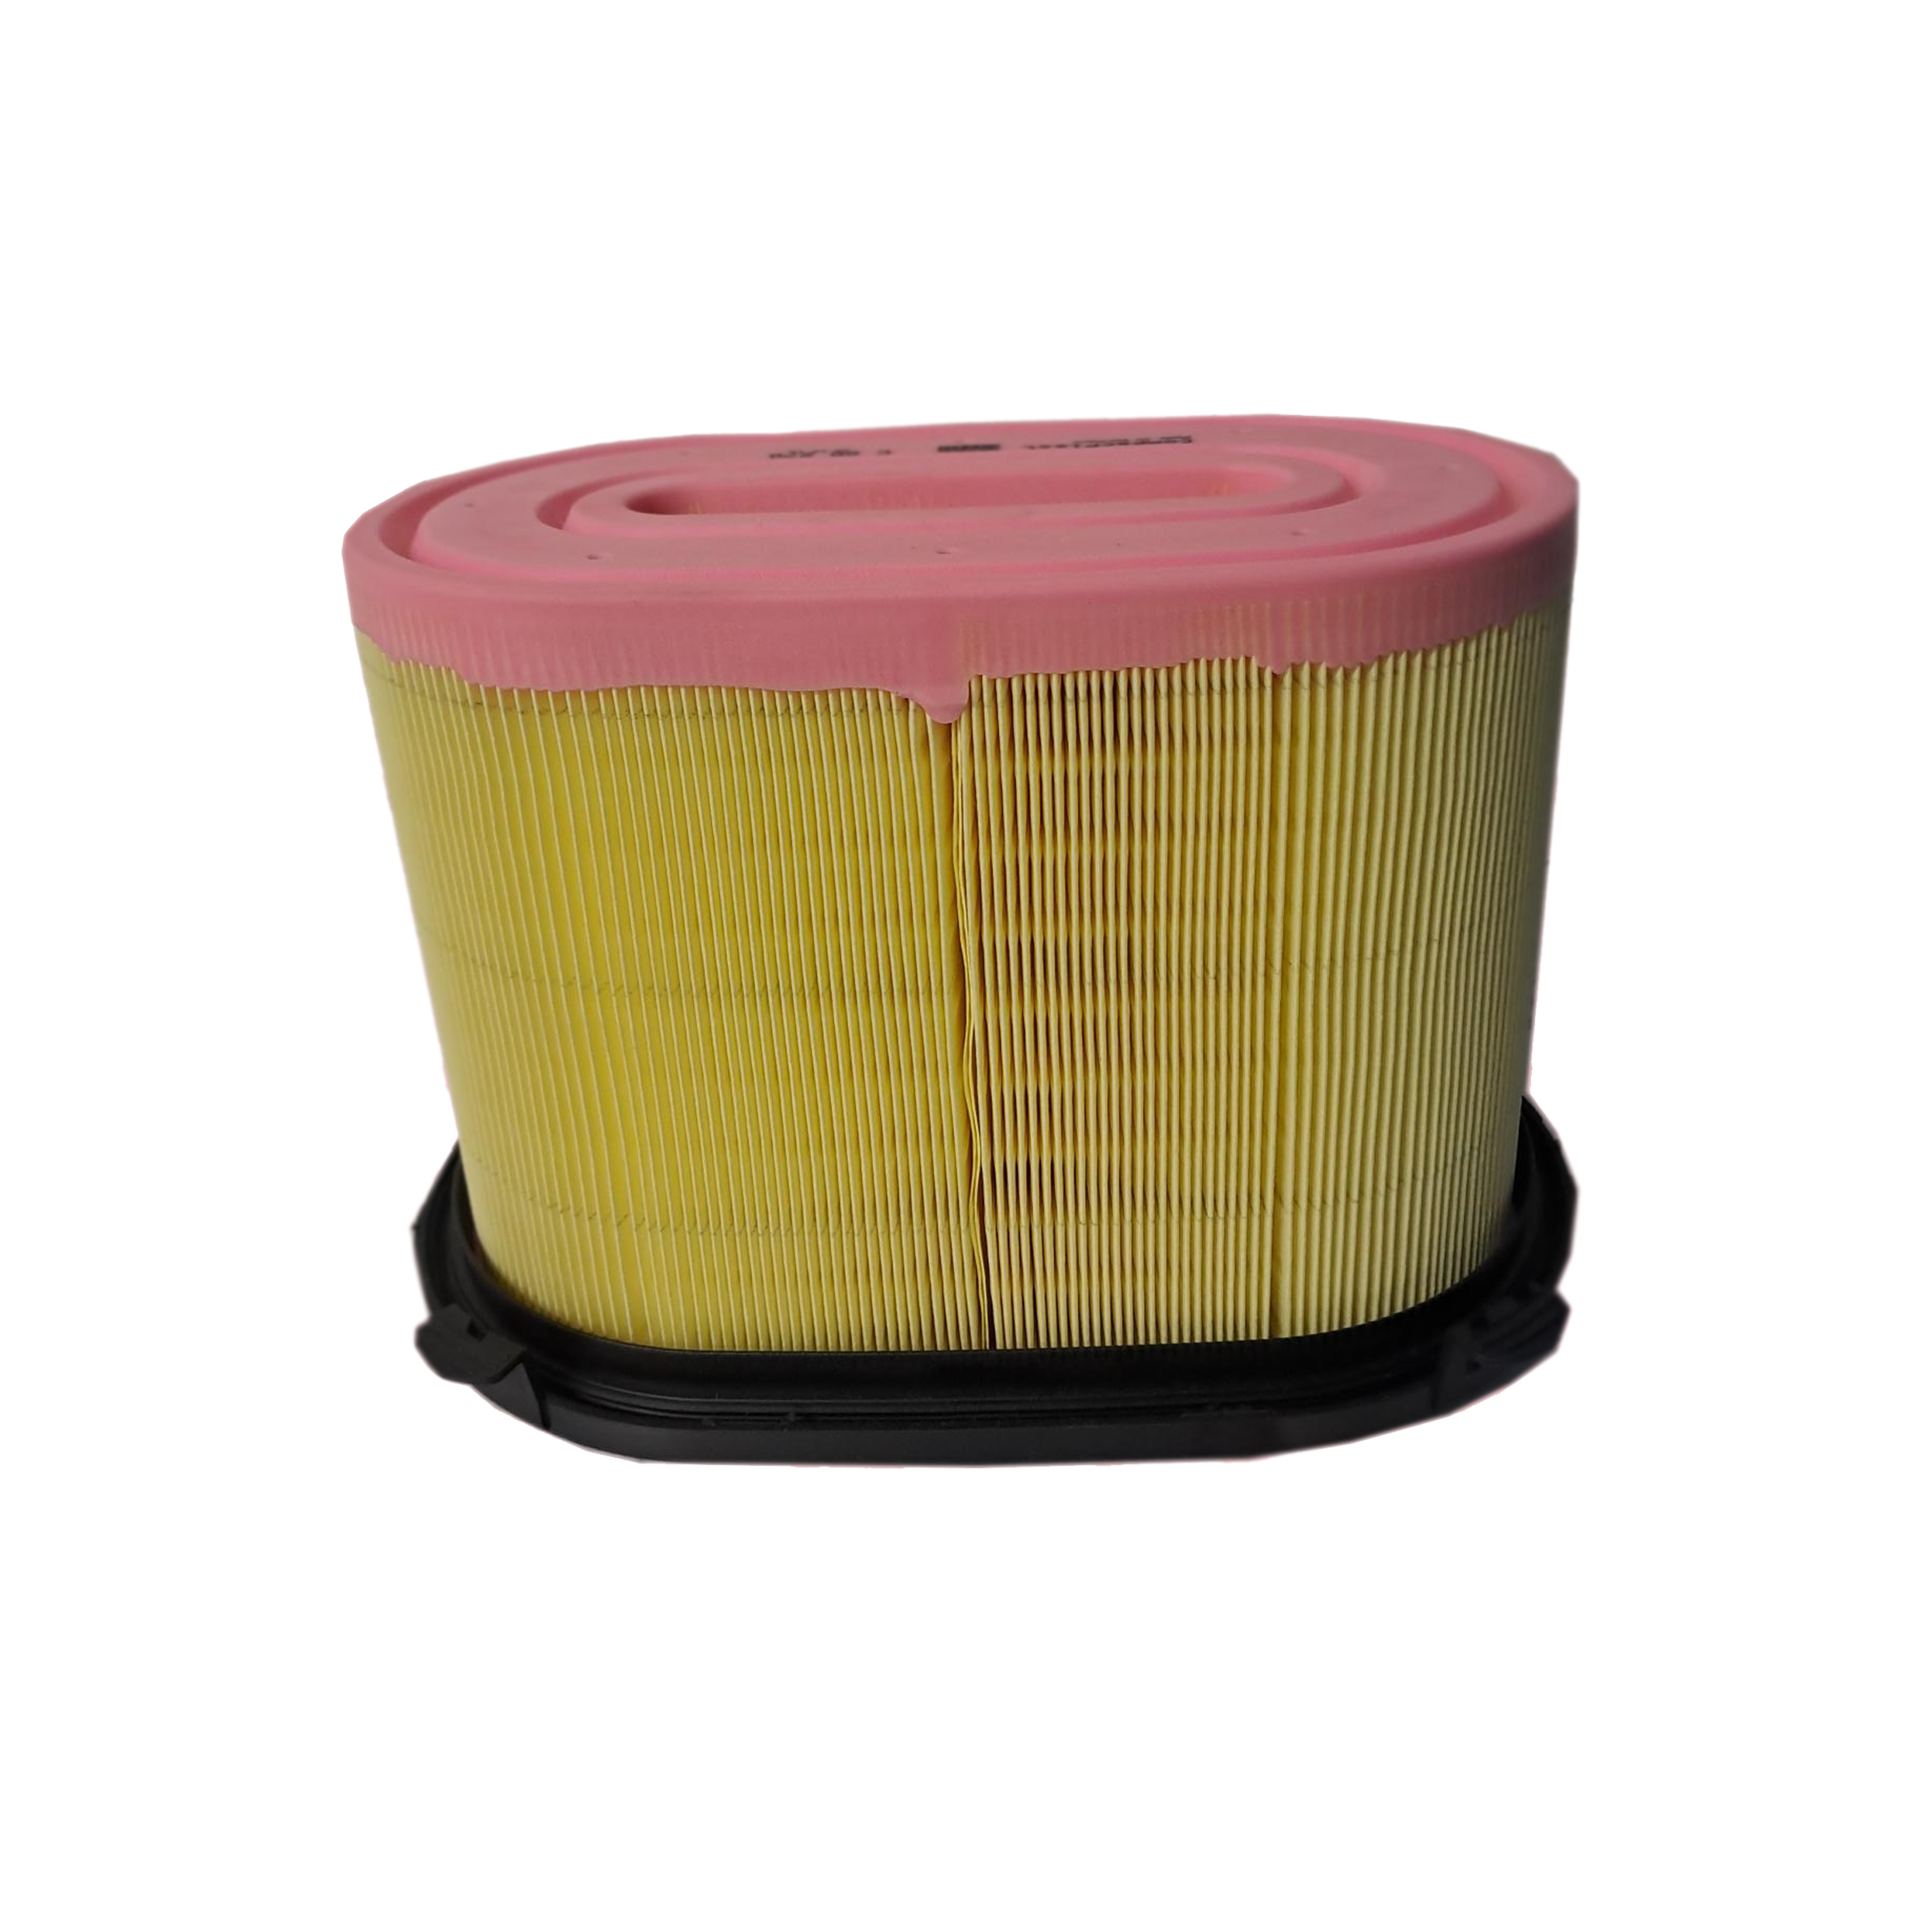 Primary Air Filter for Atlas 140W & 160MH